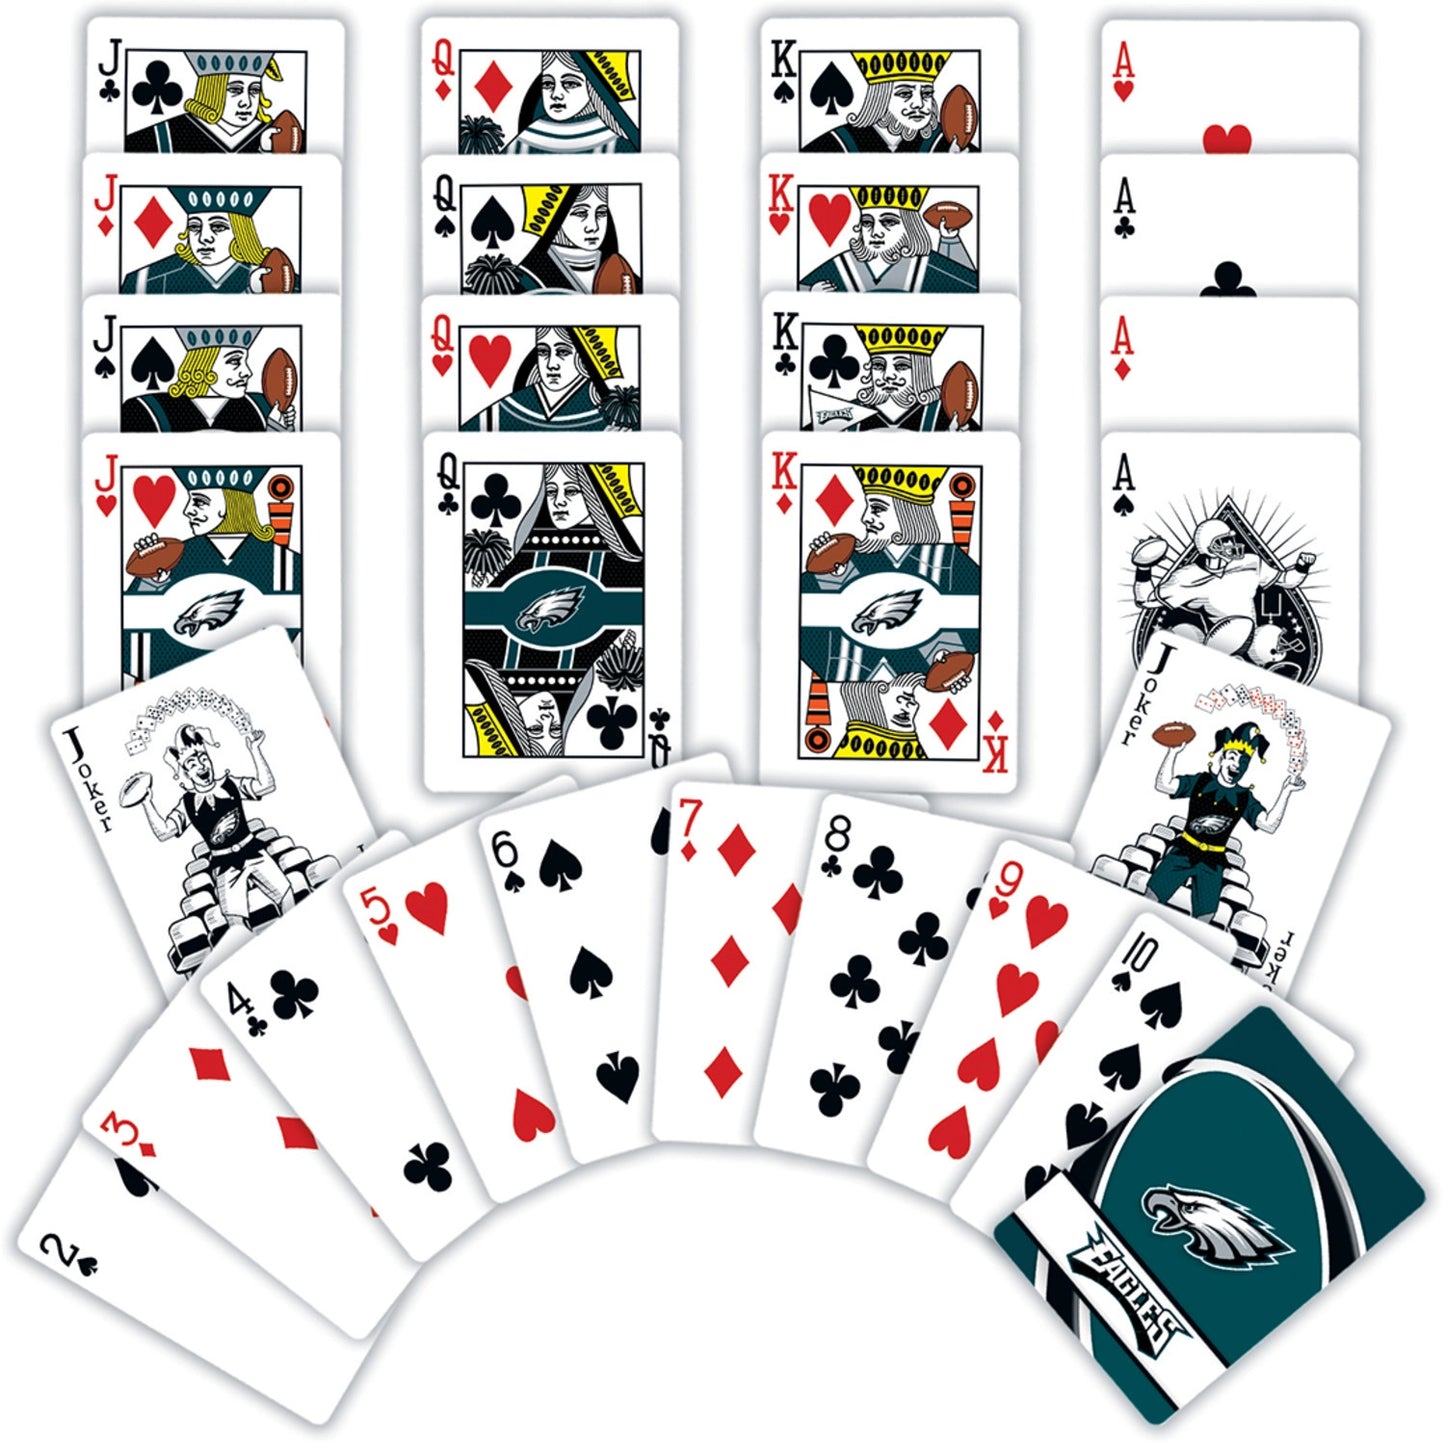 Philadelphia Eagles Playing Cards - Fly Eagles Fly!